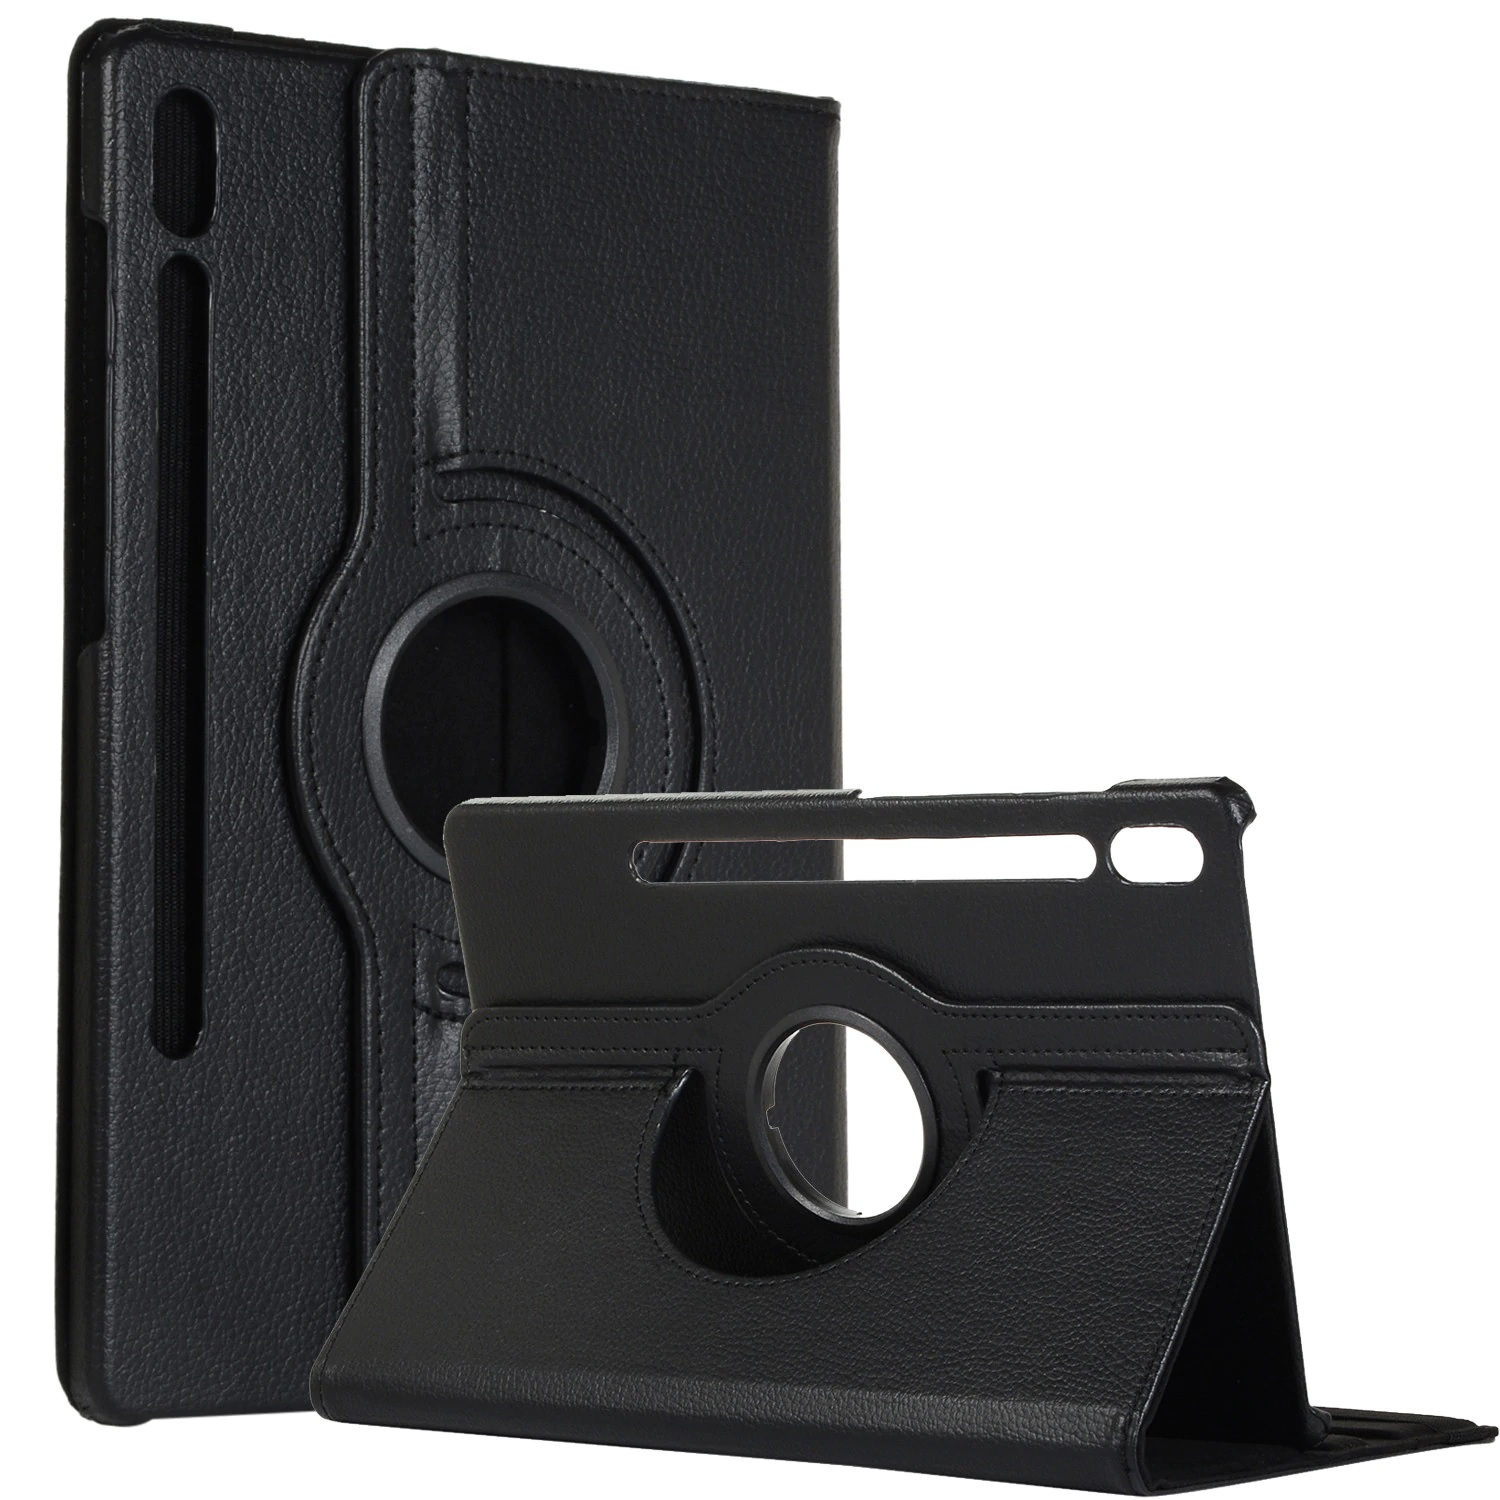 【CSmart】 Rotating PU Leather Stand Case Smart Cover for Samsung Galaxy Tab S7 Plus / S8 Plus 2022 12.4", T970 / X800, Black